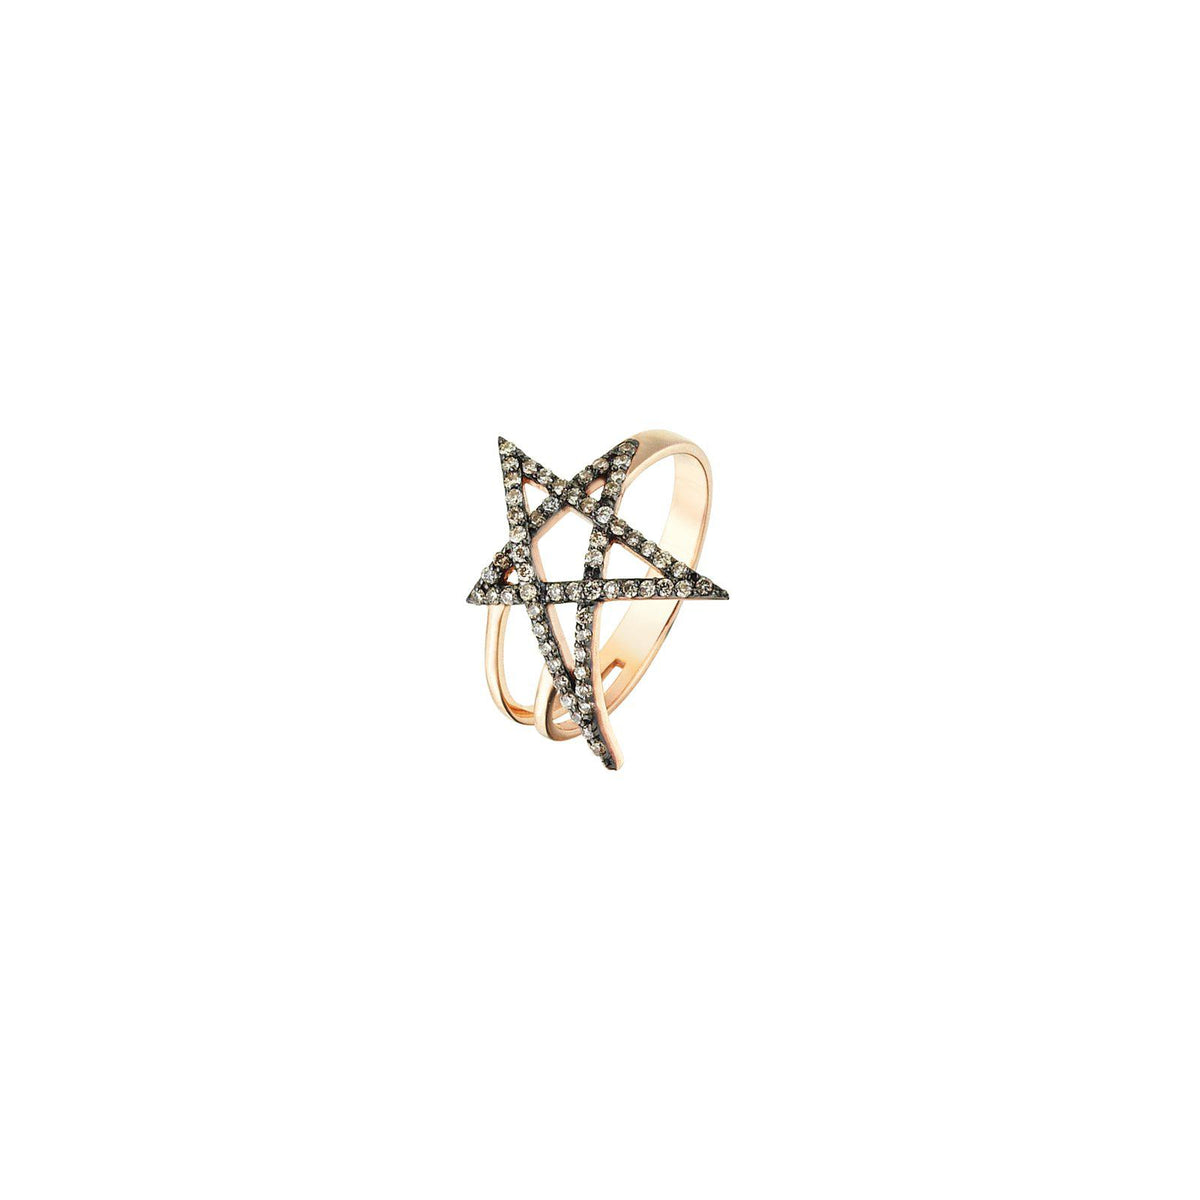 Doodle Star Ring